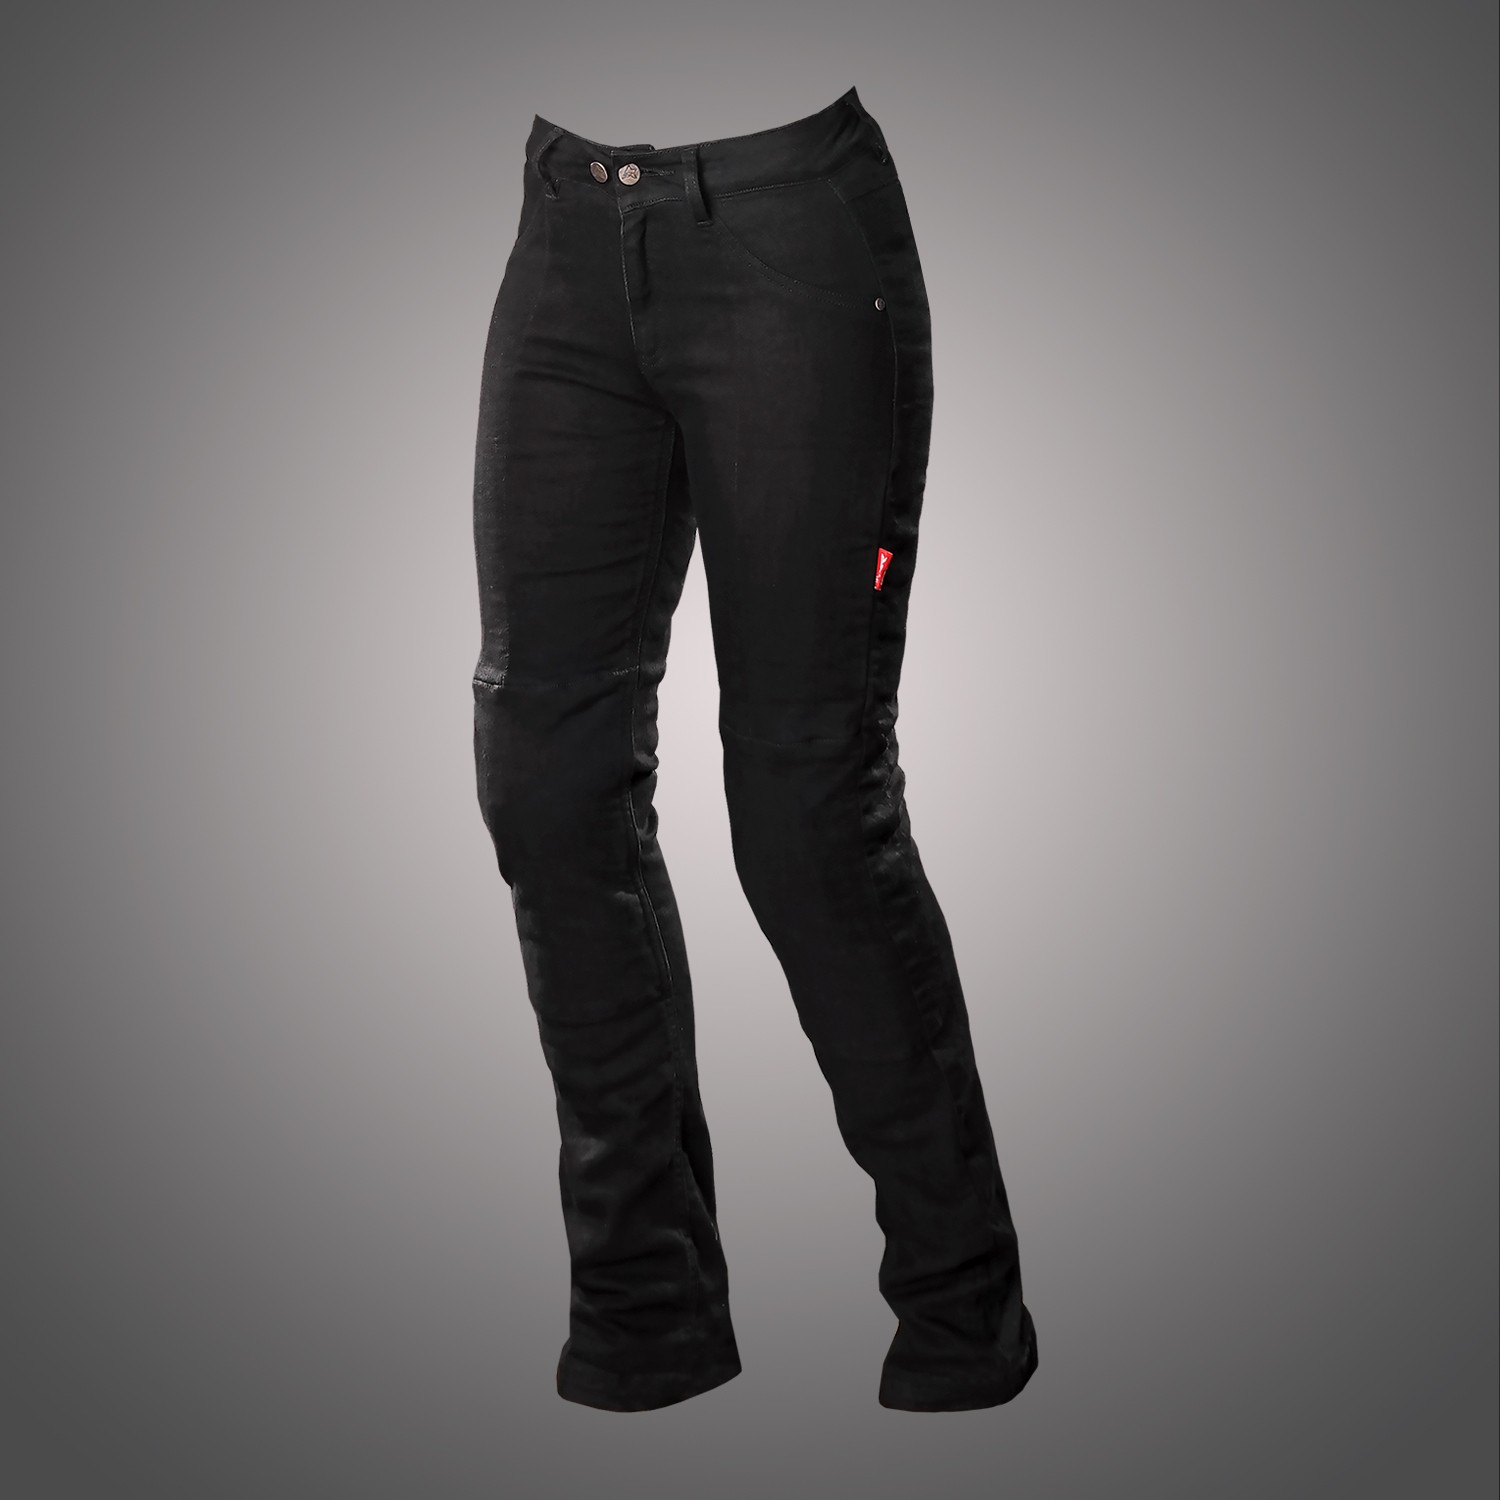 Motorcycle riding jeans and Motorcycle riding pants – DYNS JEANS